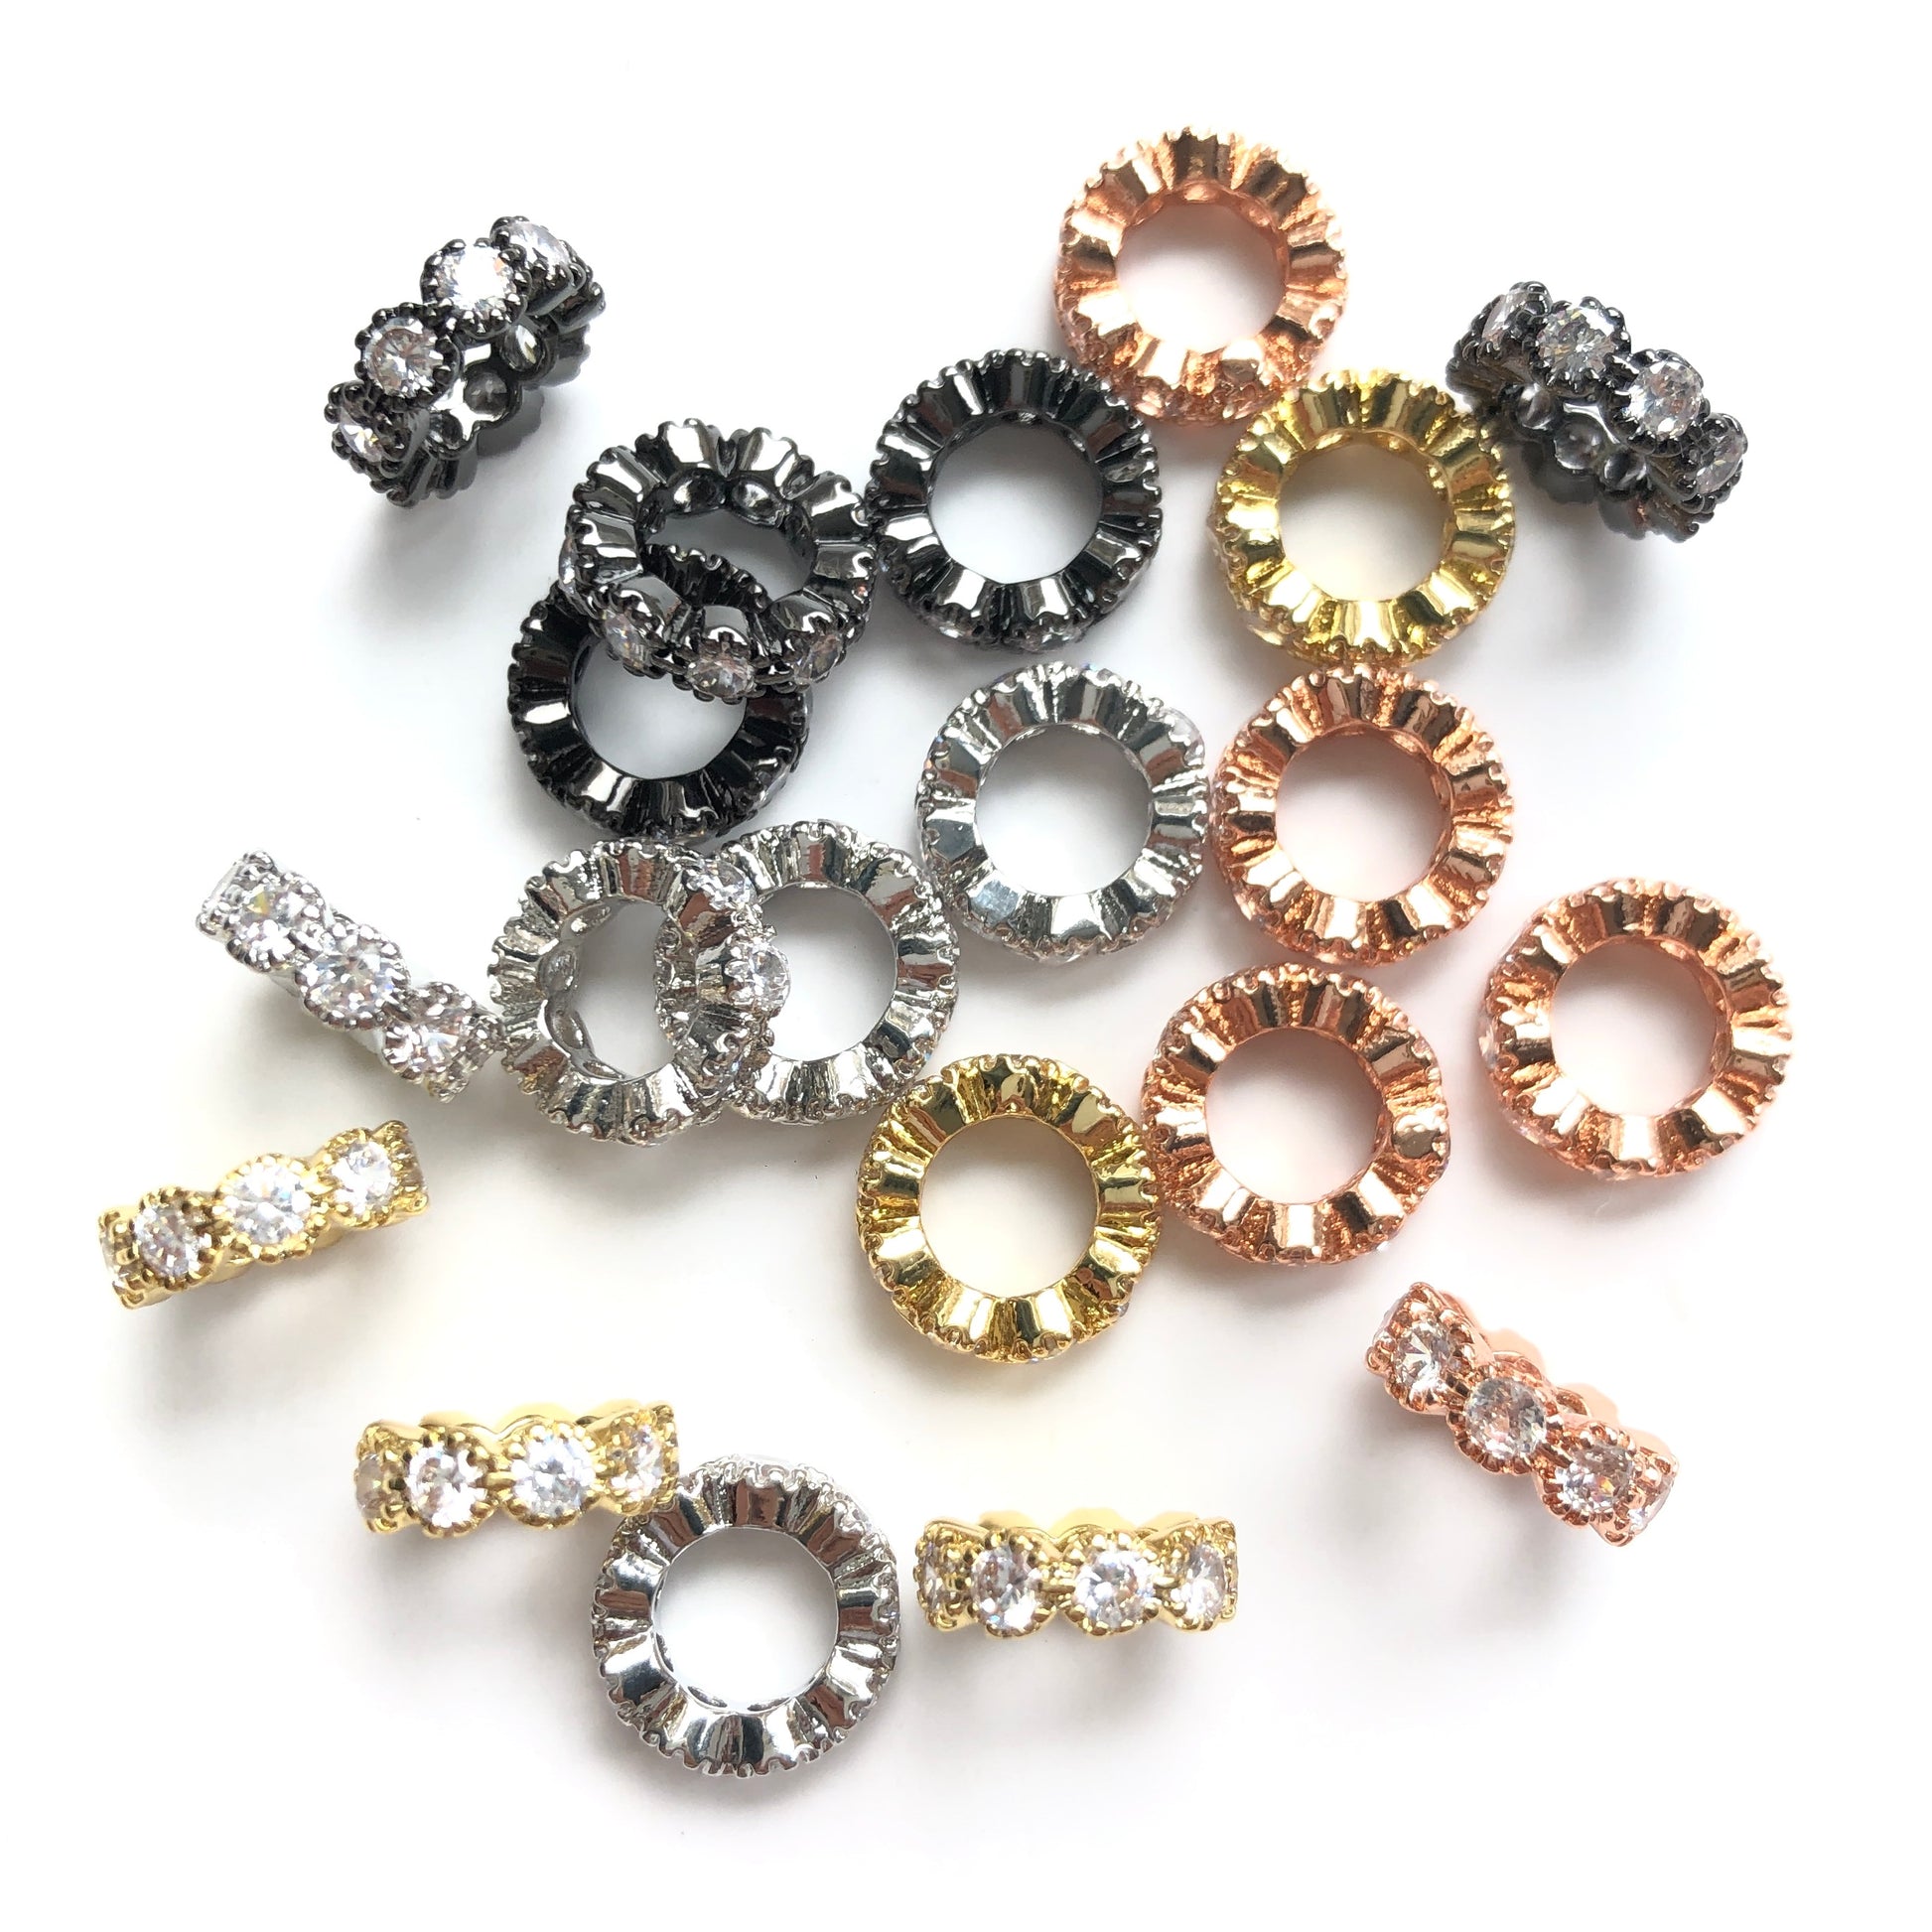 20 Pcs Rose Gold Clear Rhinestone Rondelle Spacer Beads 6mm X 3mm